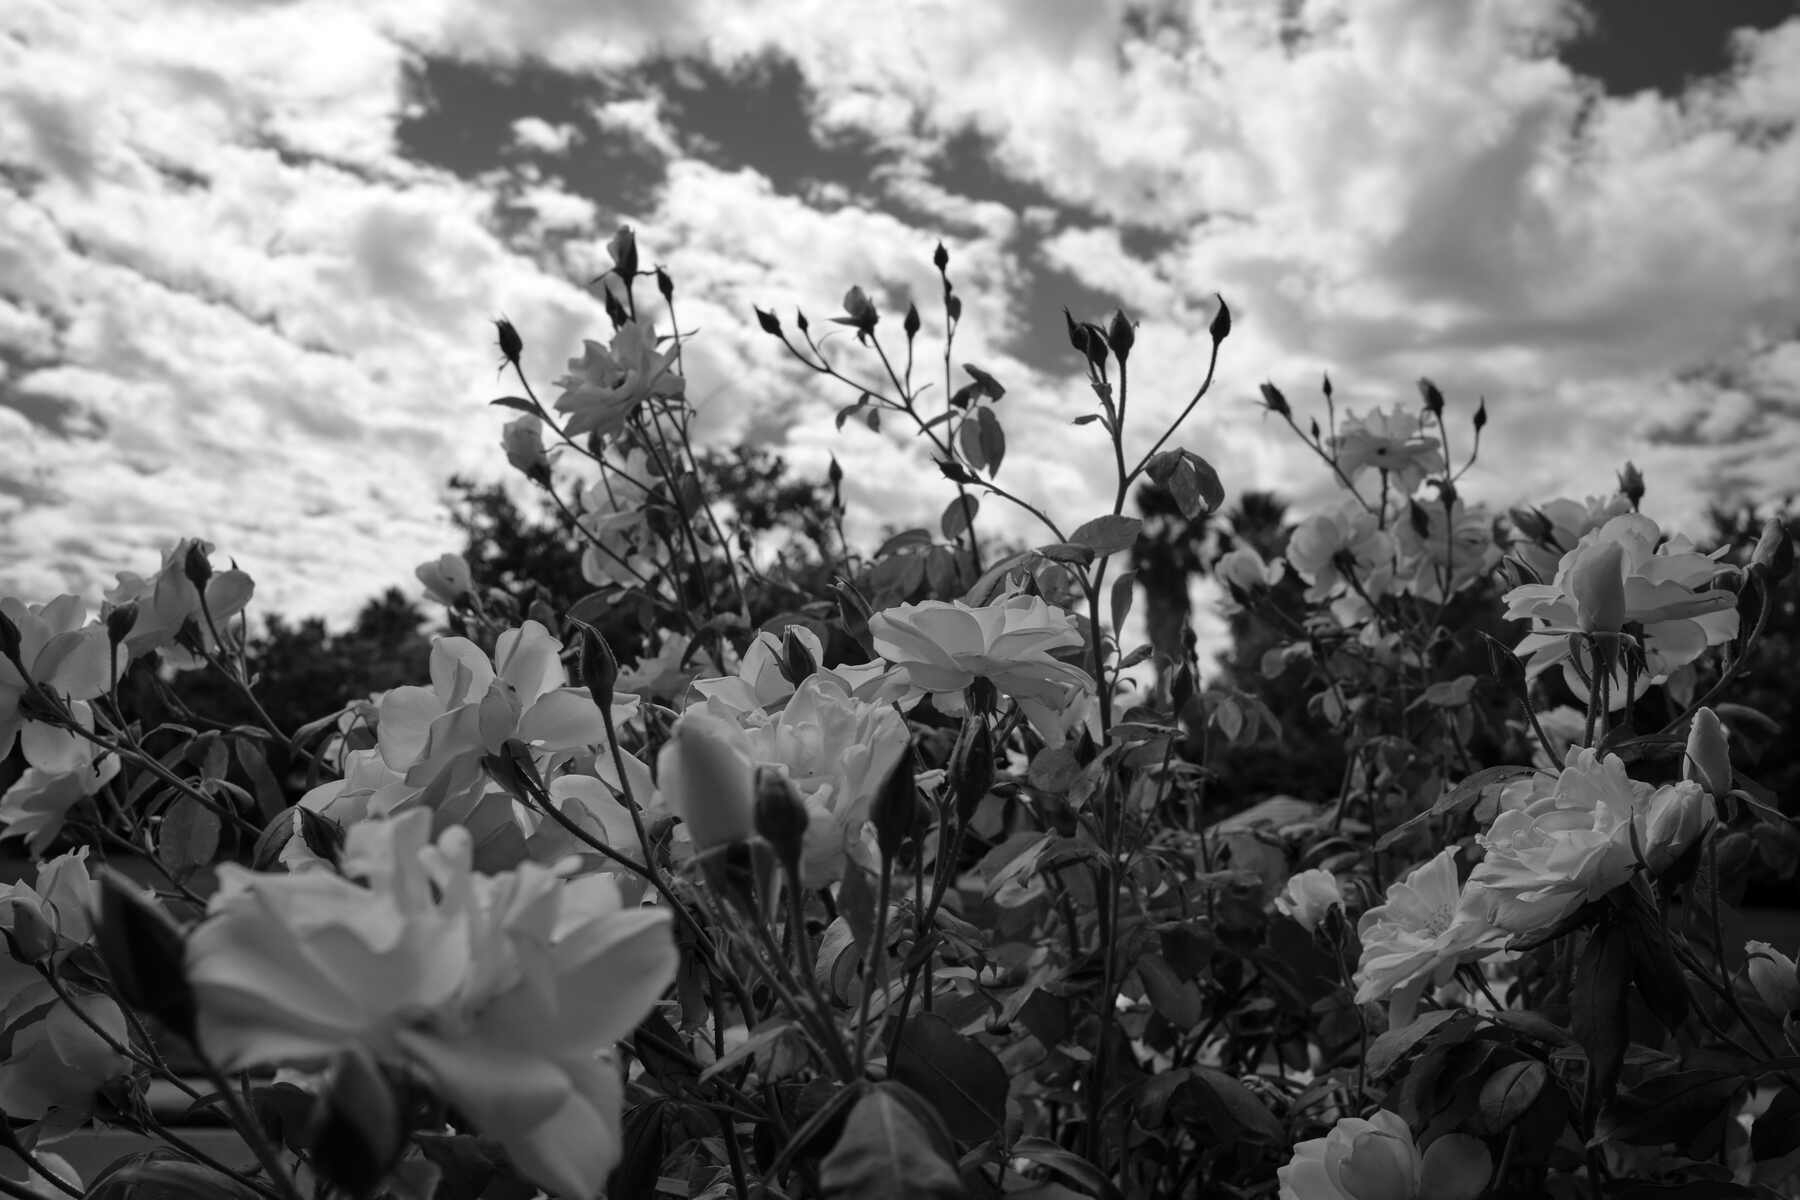 In black and white, white roses, leaves, and stems in the foreground with a cloudy sky in the background. 